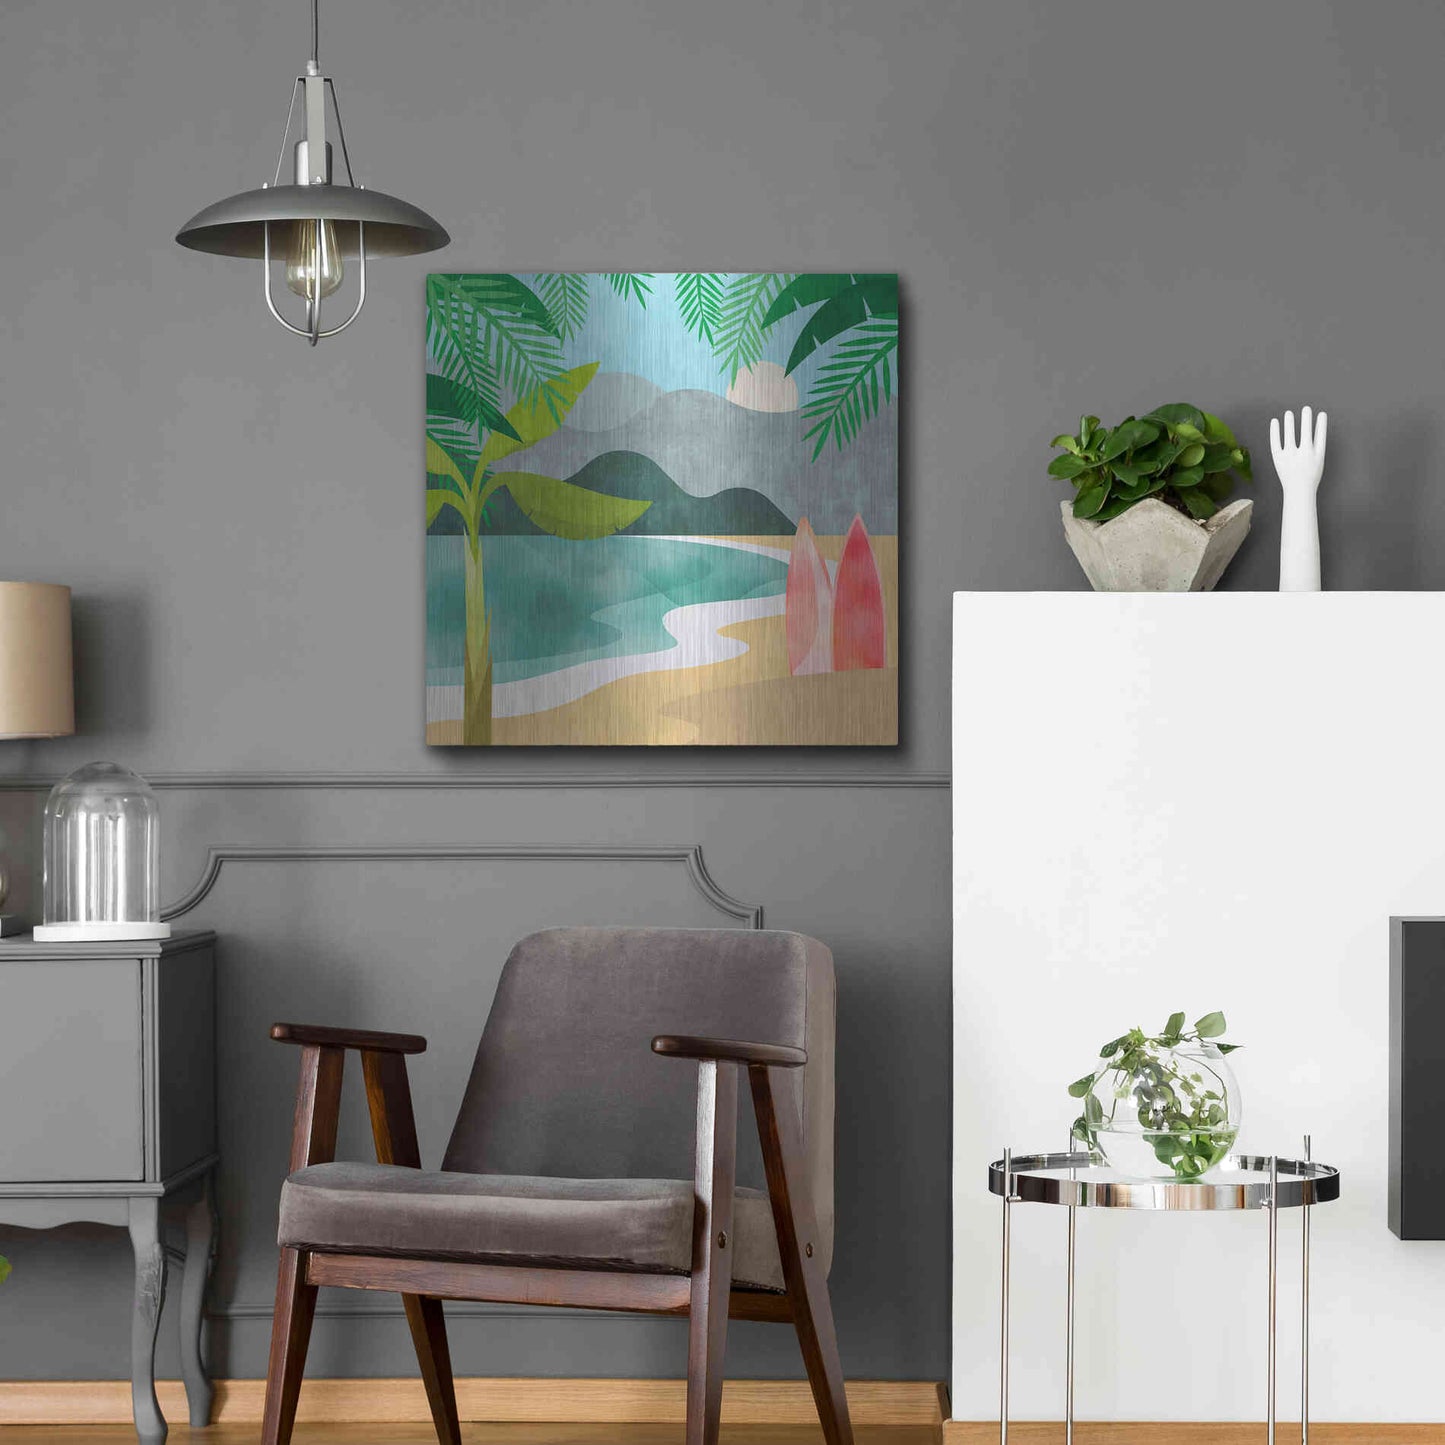 Luxe Metal Art 'Secret Surf Spot' by Andrea Haase, Metal Wall At,24x24